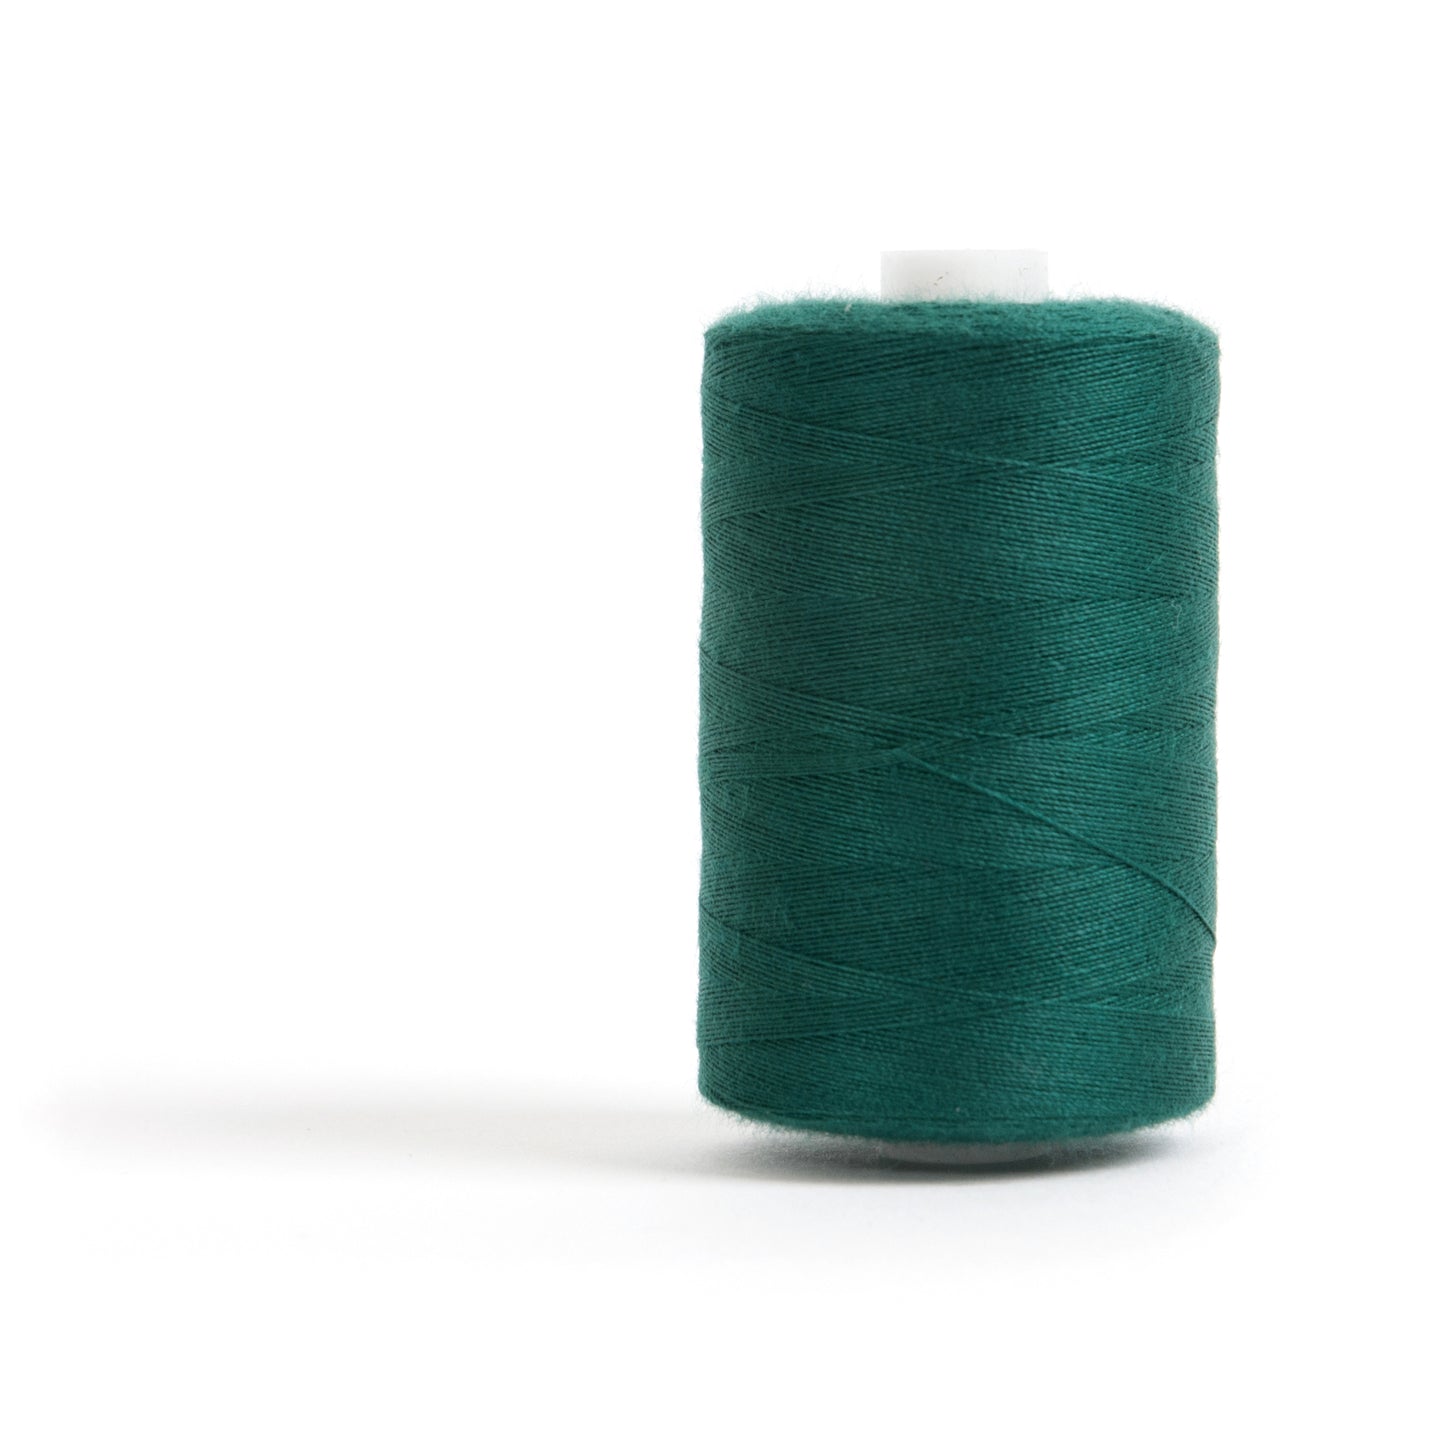 Sewing and Overlocking Thread: 1,000m: Bottle